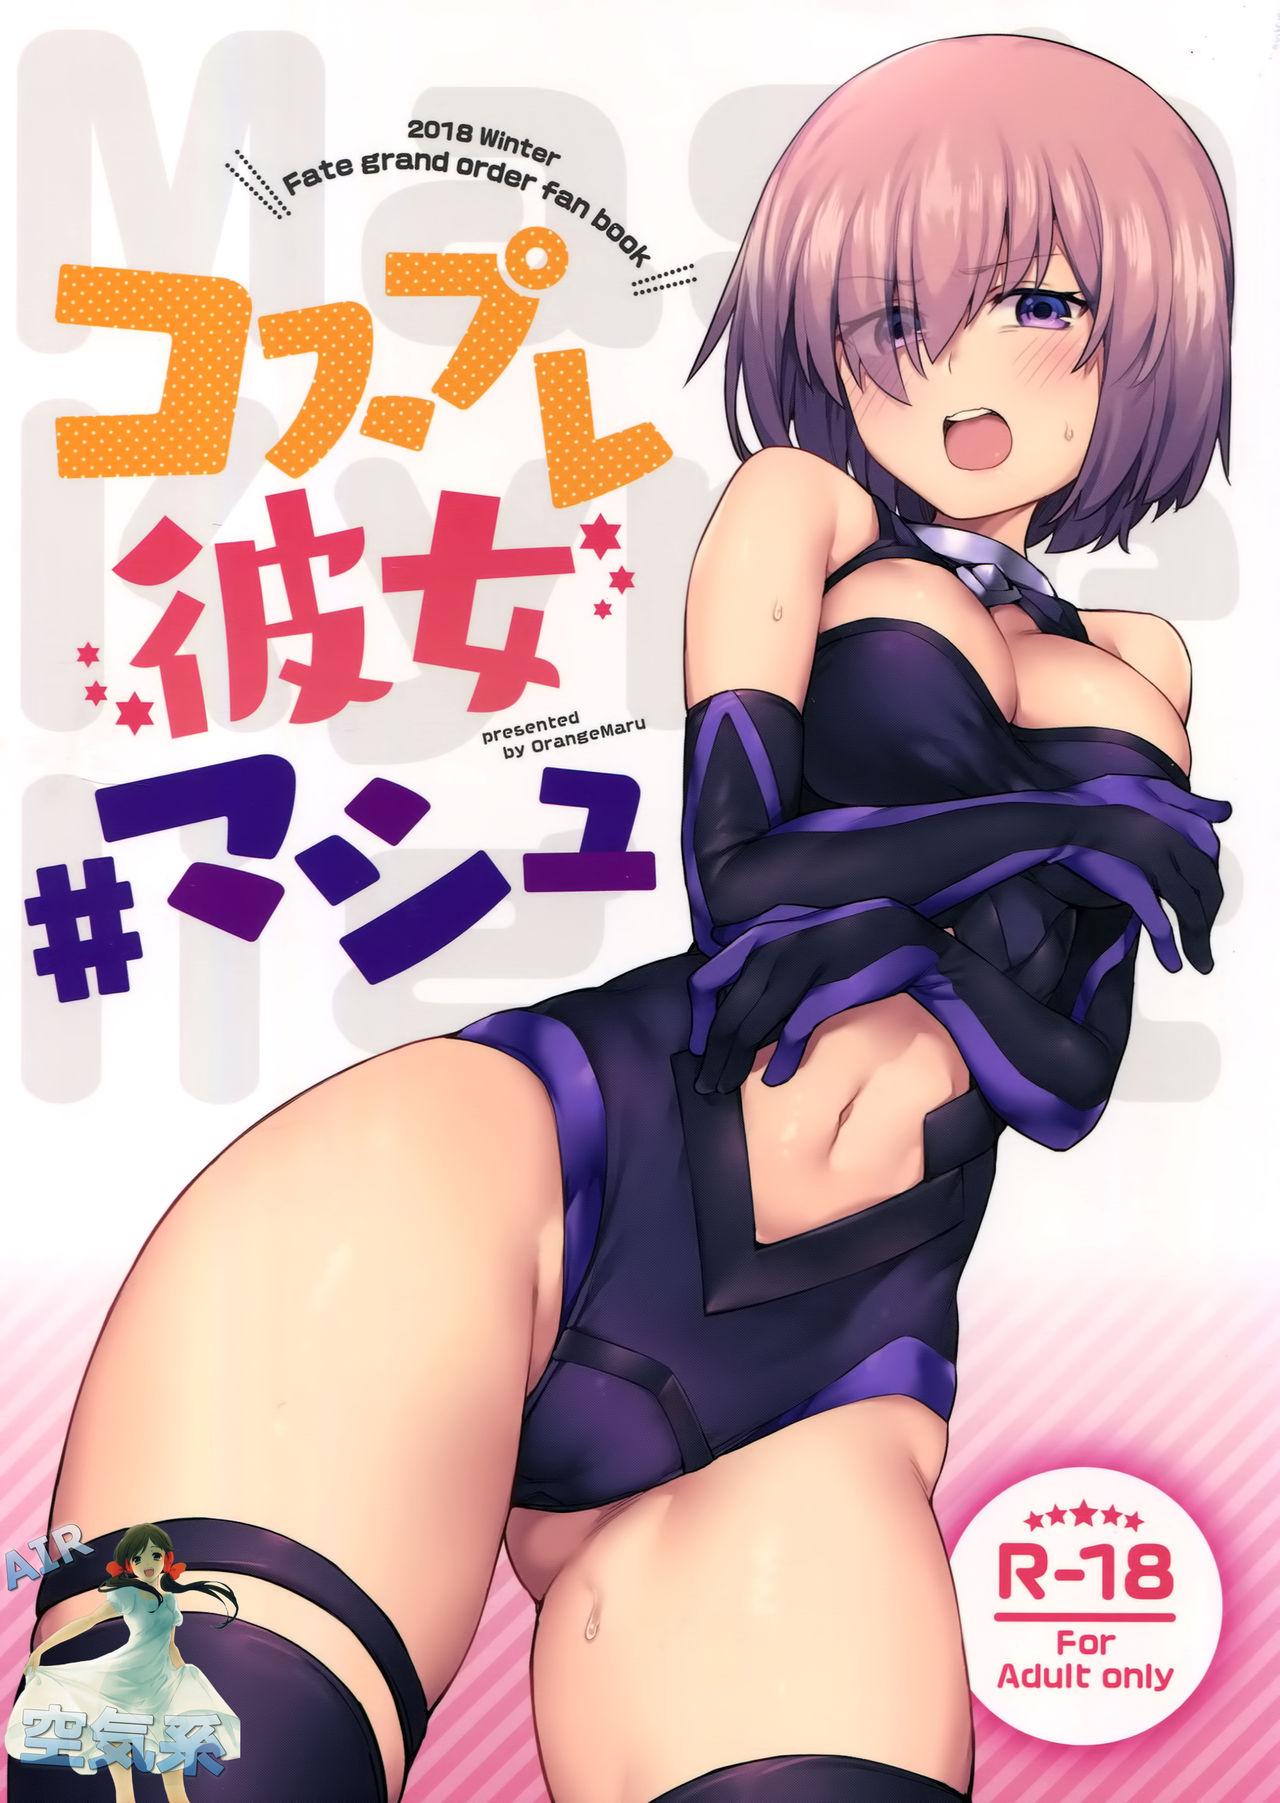 Naked Cosplay Kanojo #Mash - Fate grand order Analsex - Page 2